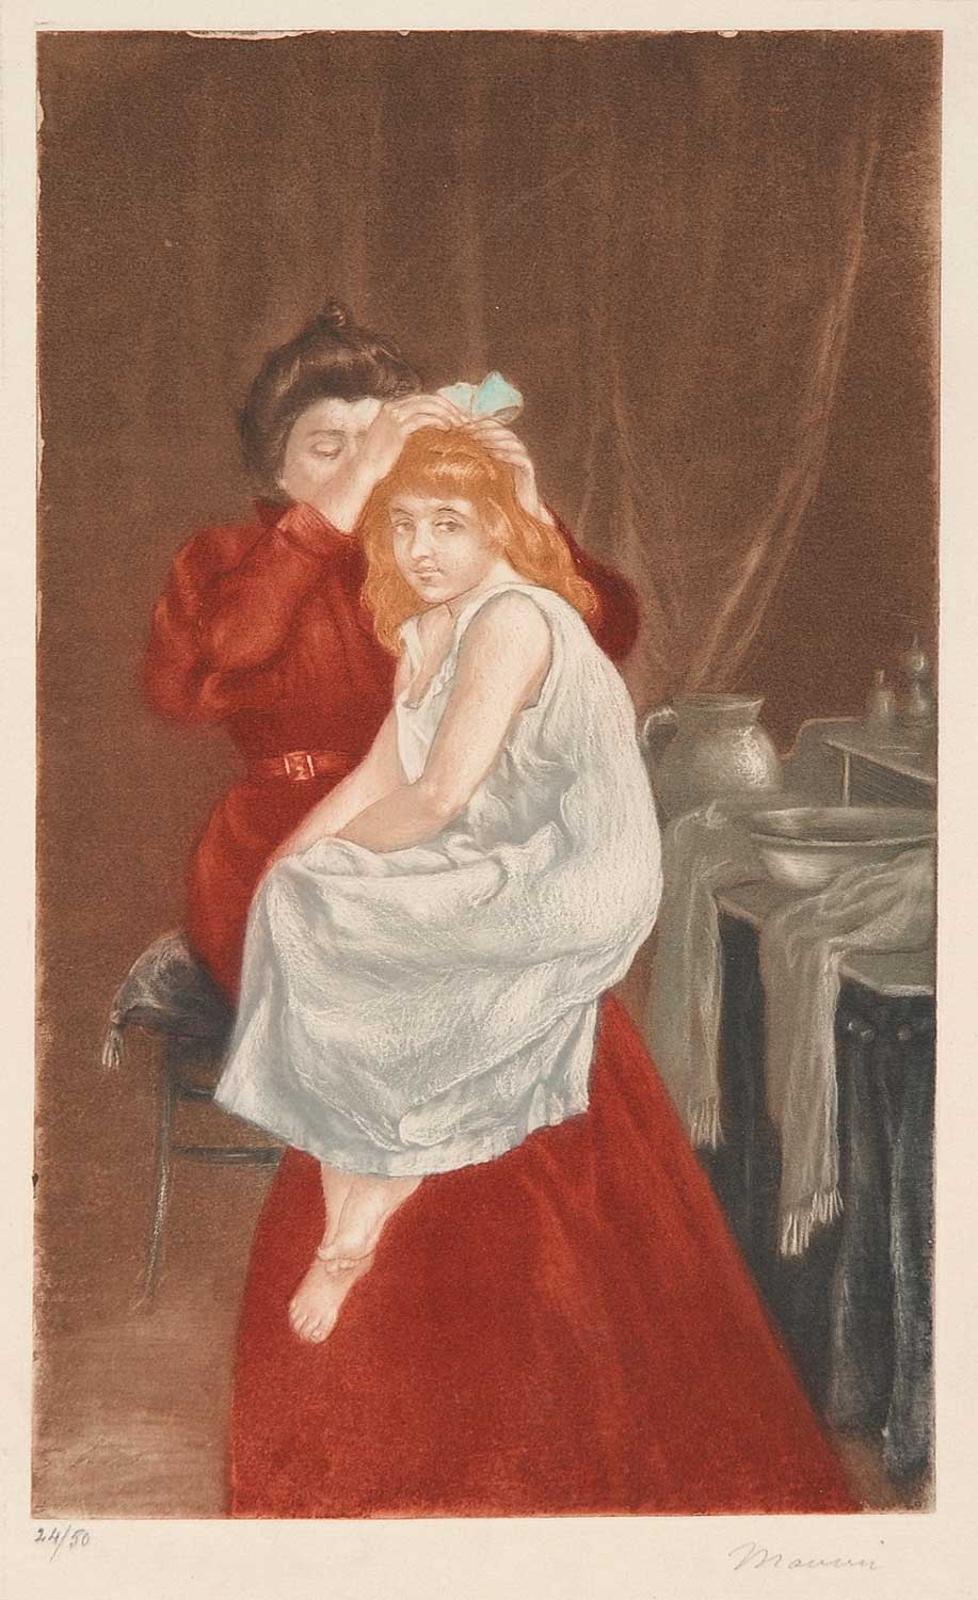 Charles Maurin - Untitled - Mother Combing Daughter's Hair  #24/50